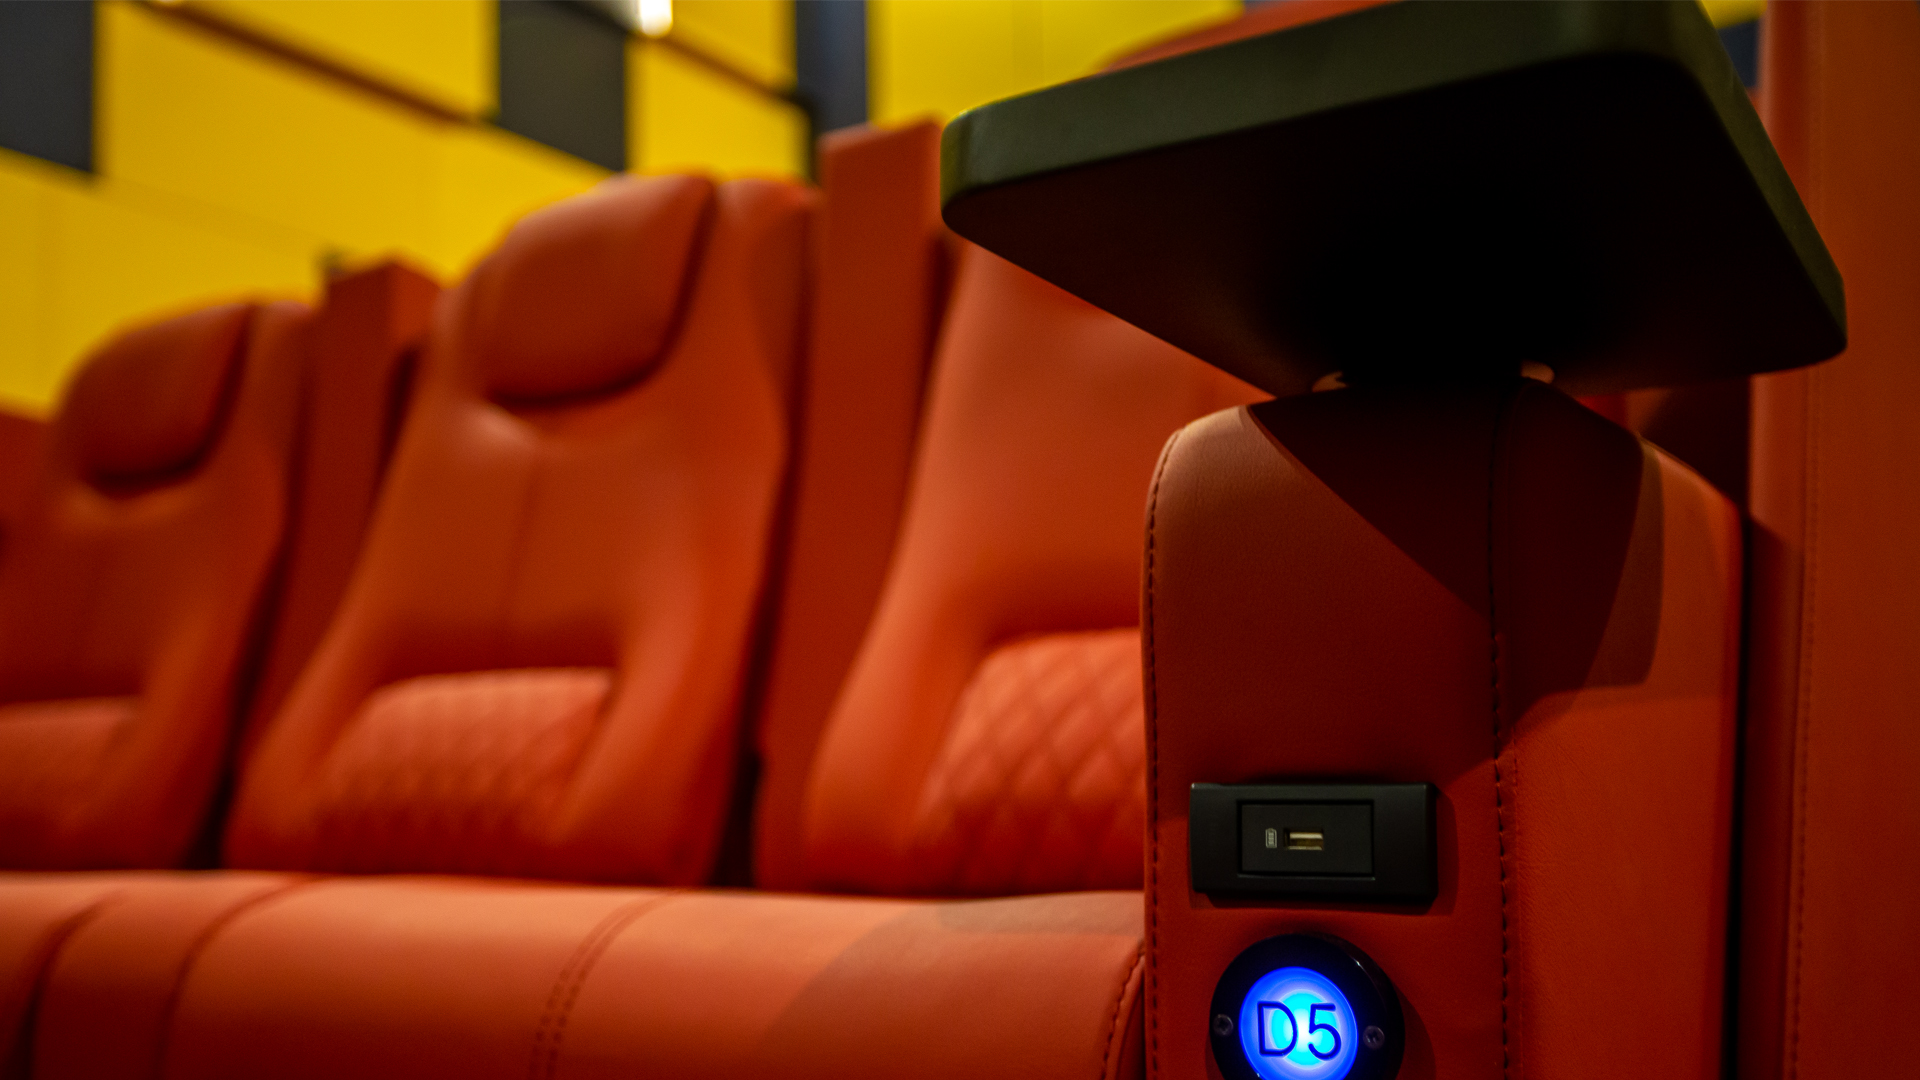 The USB charging ports in the Lumiere seats